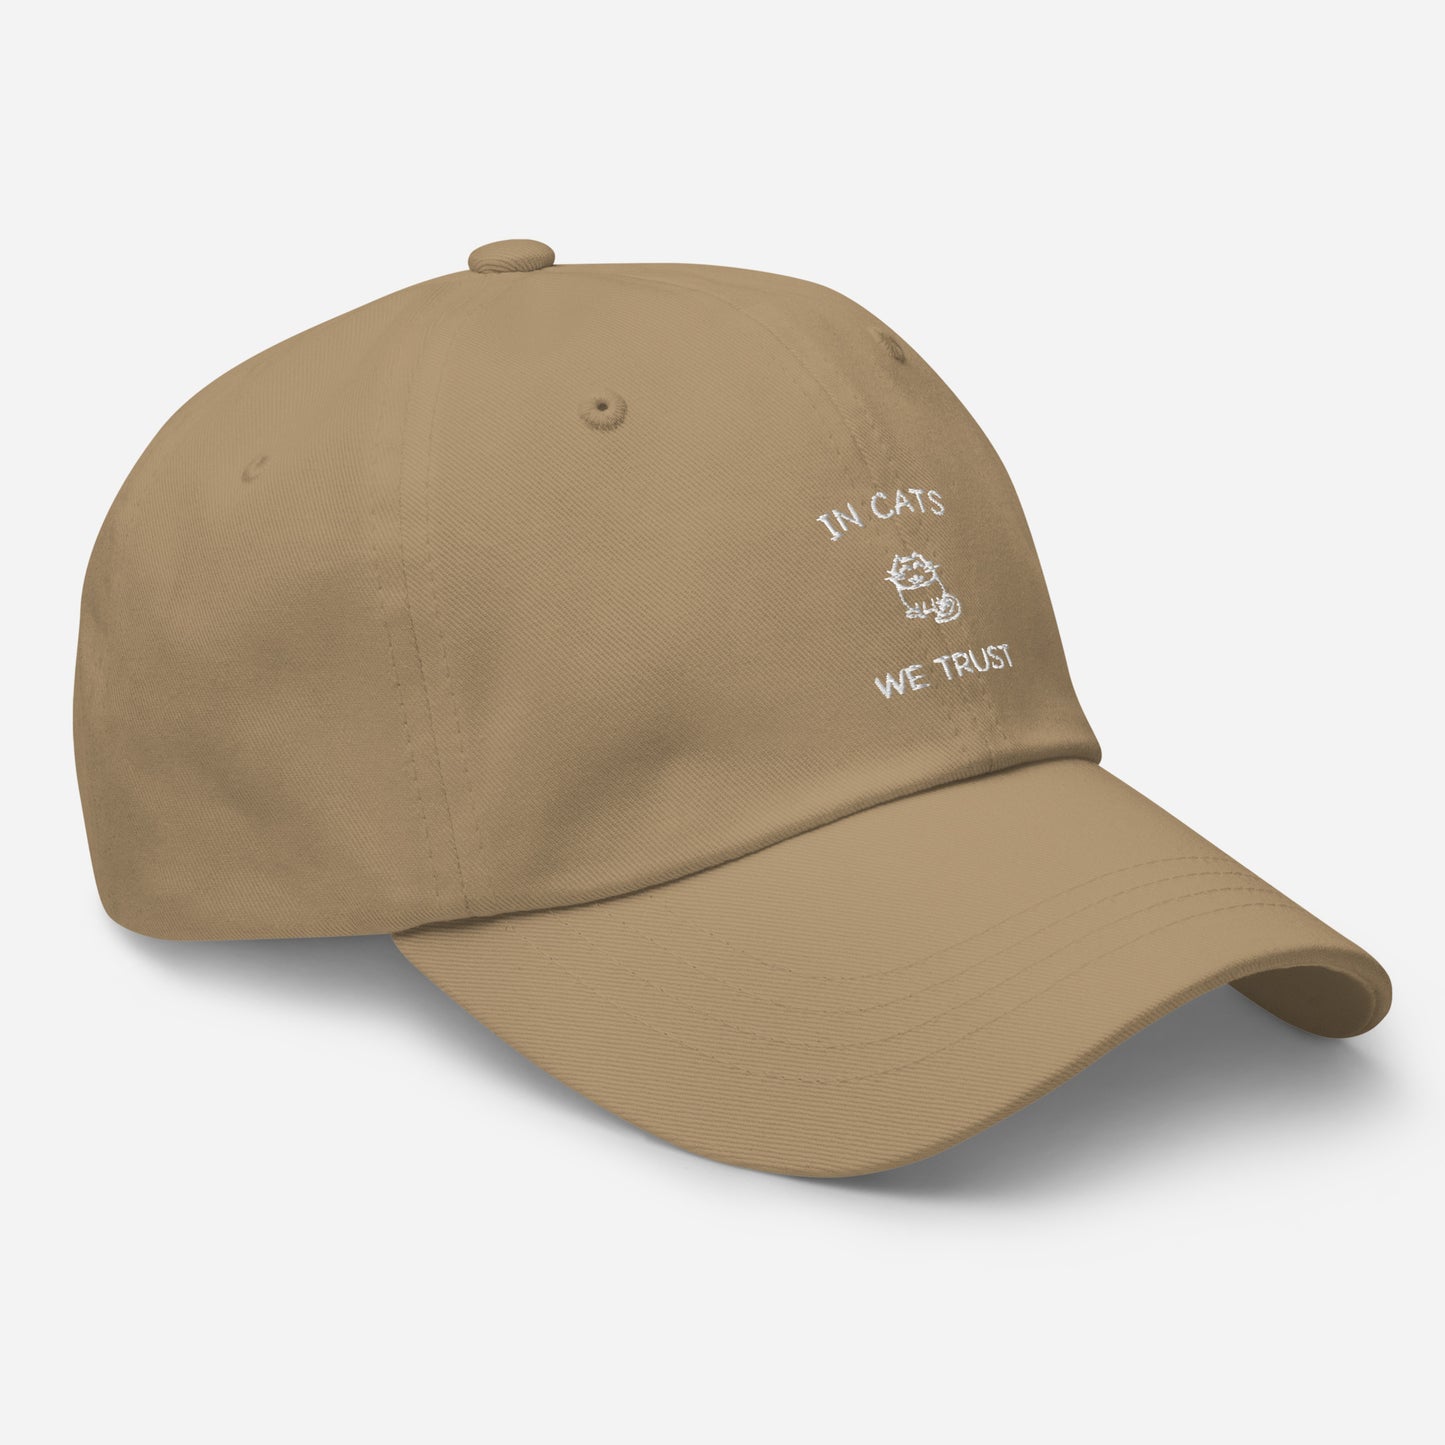 IN CATS WE TRUST - EMBROIDERED CAP